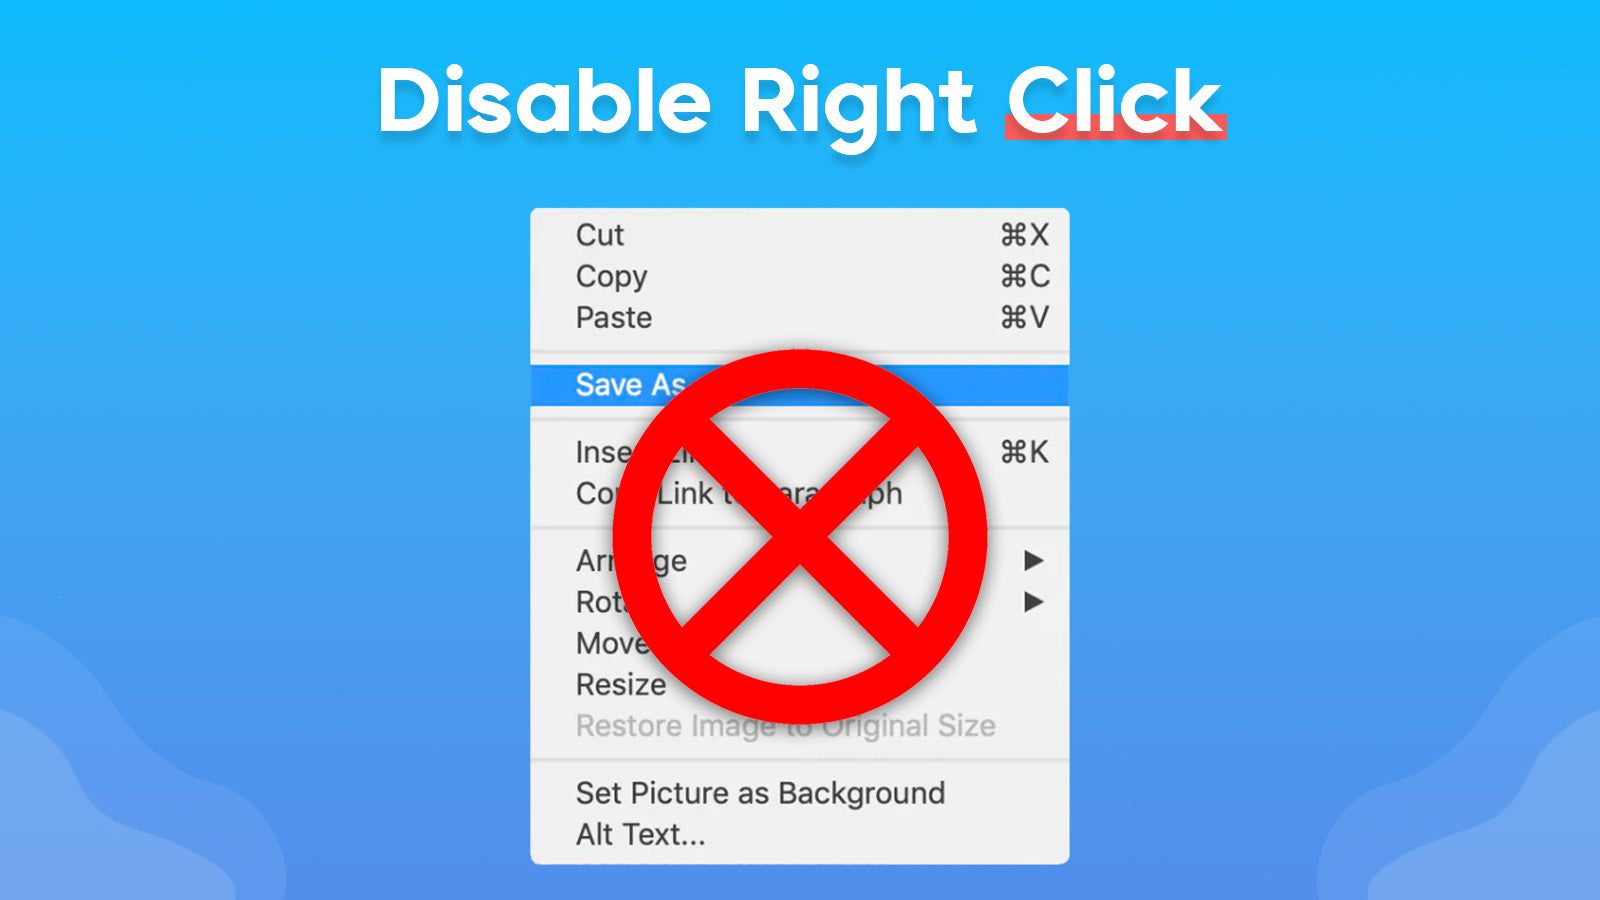 Disable Right-Click